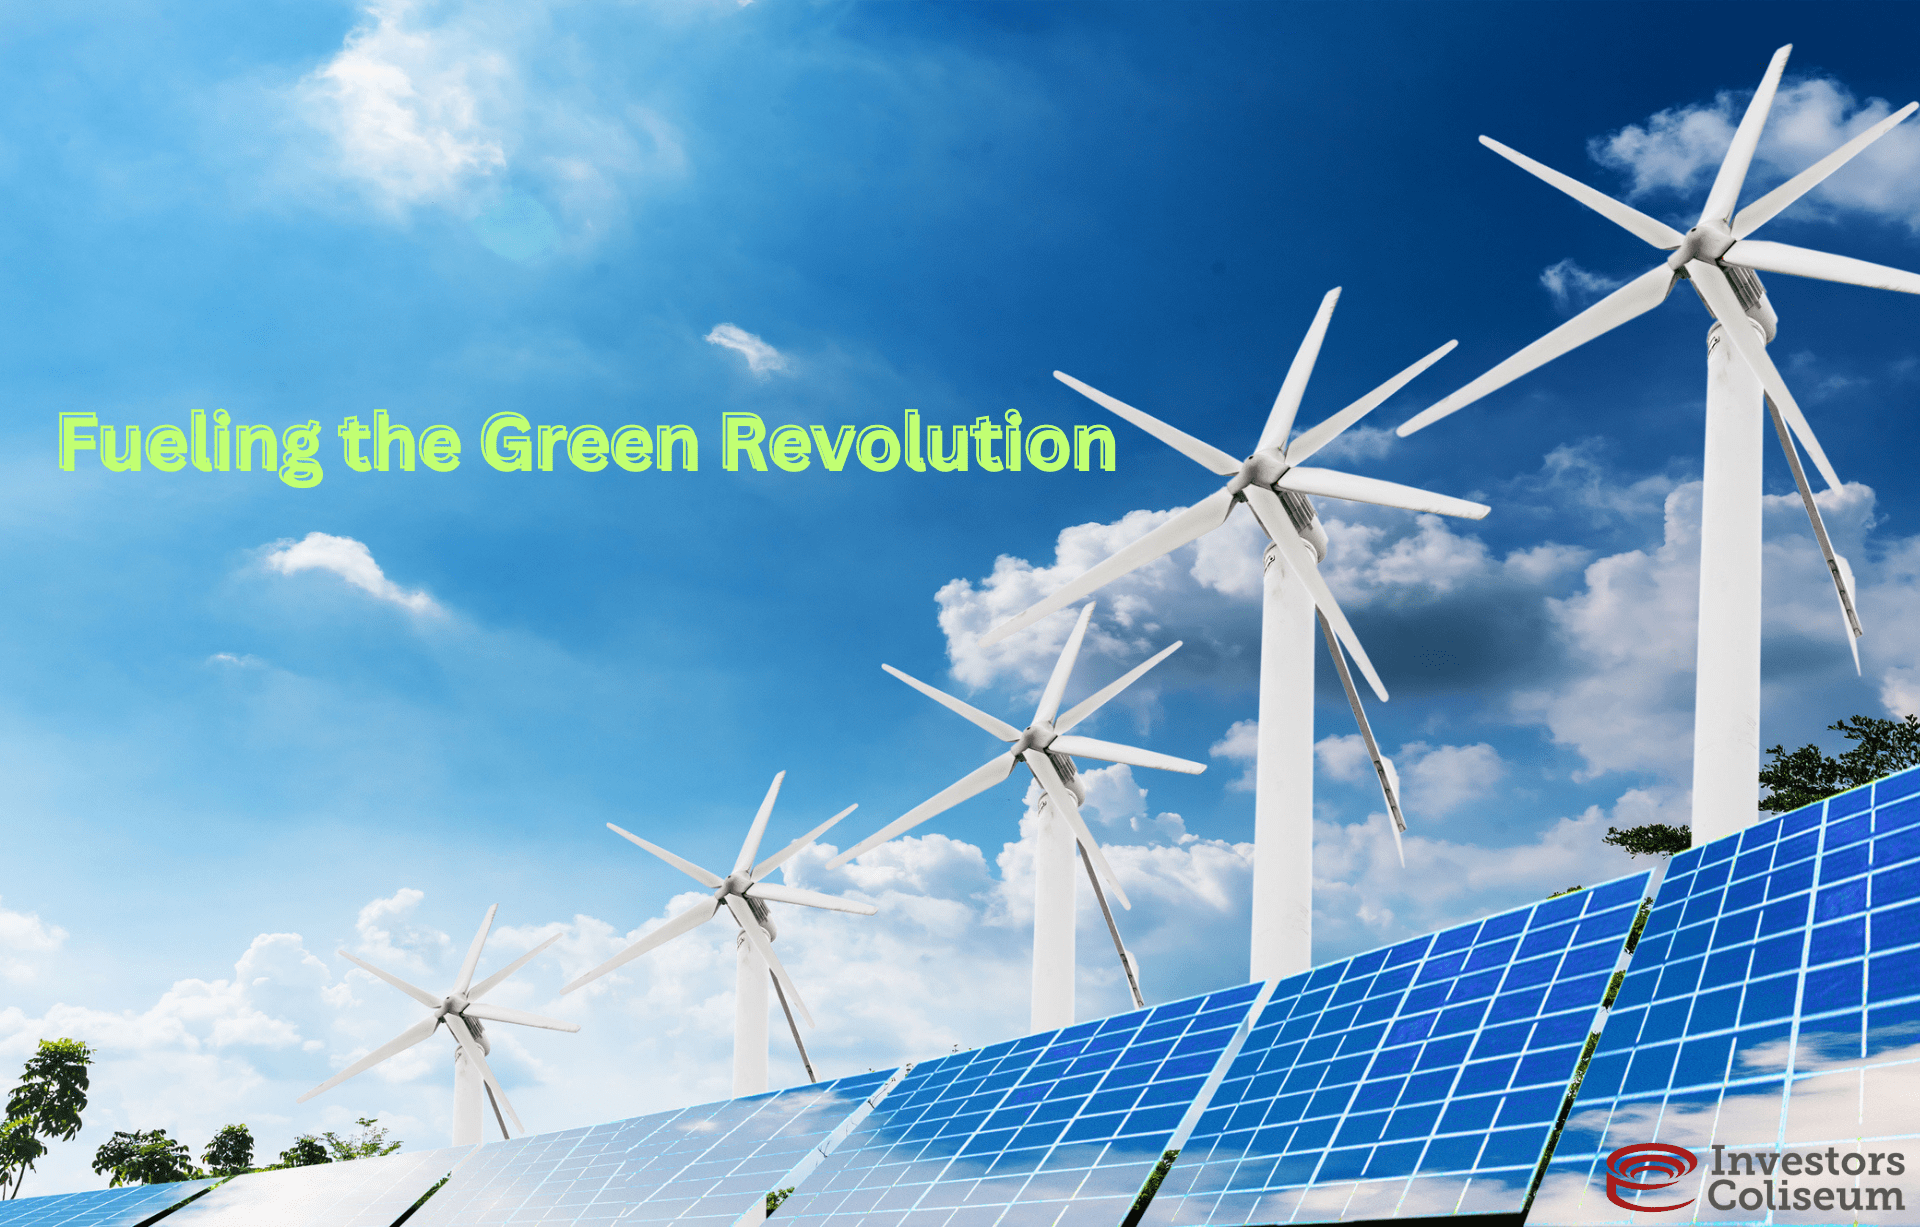 Fueling the Green Revolution: &#8220;Data-Driven Sustainability &#8220;